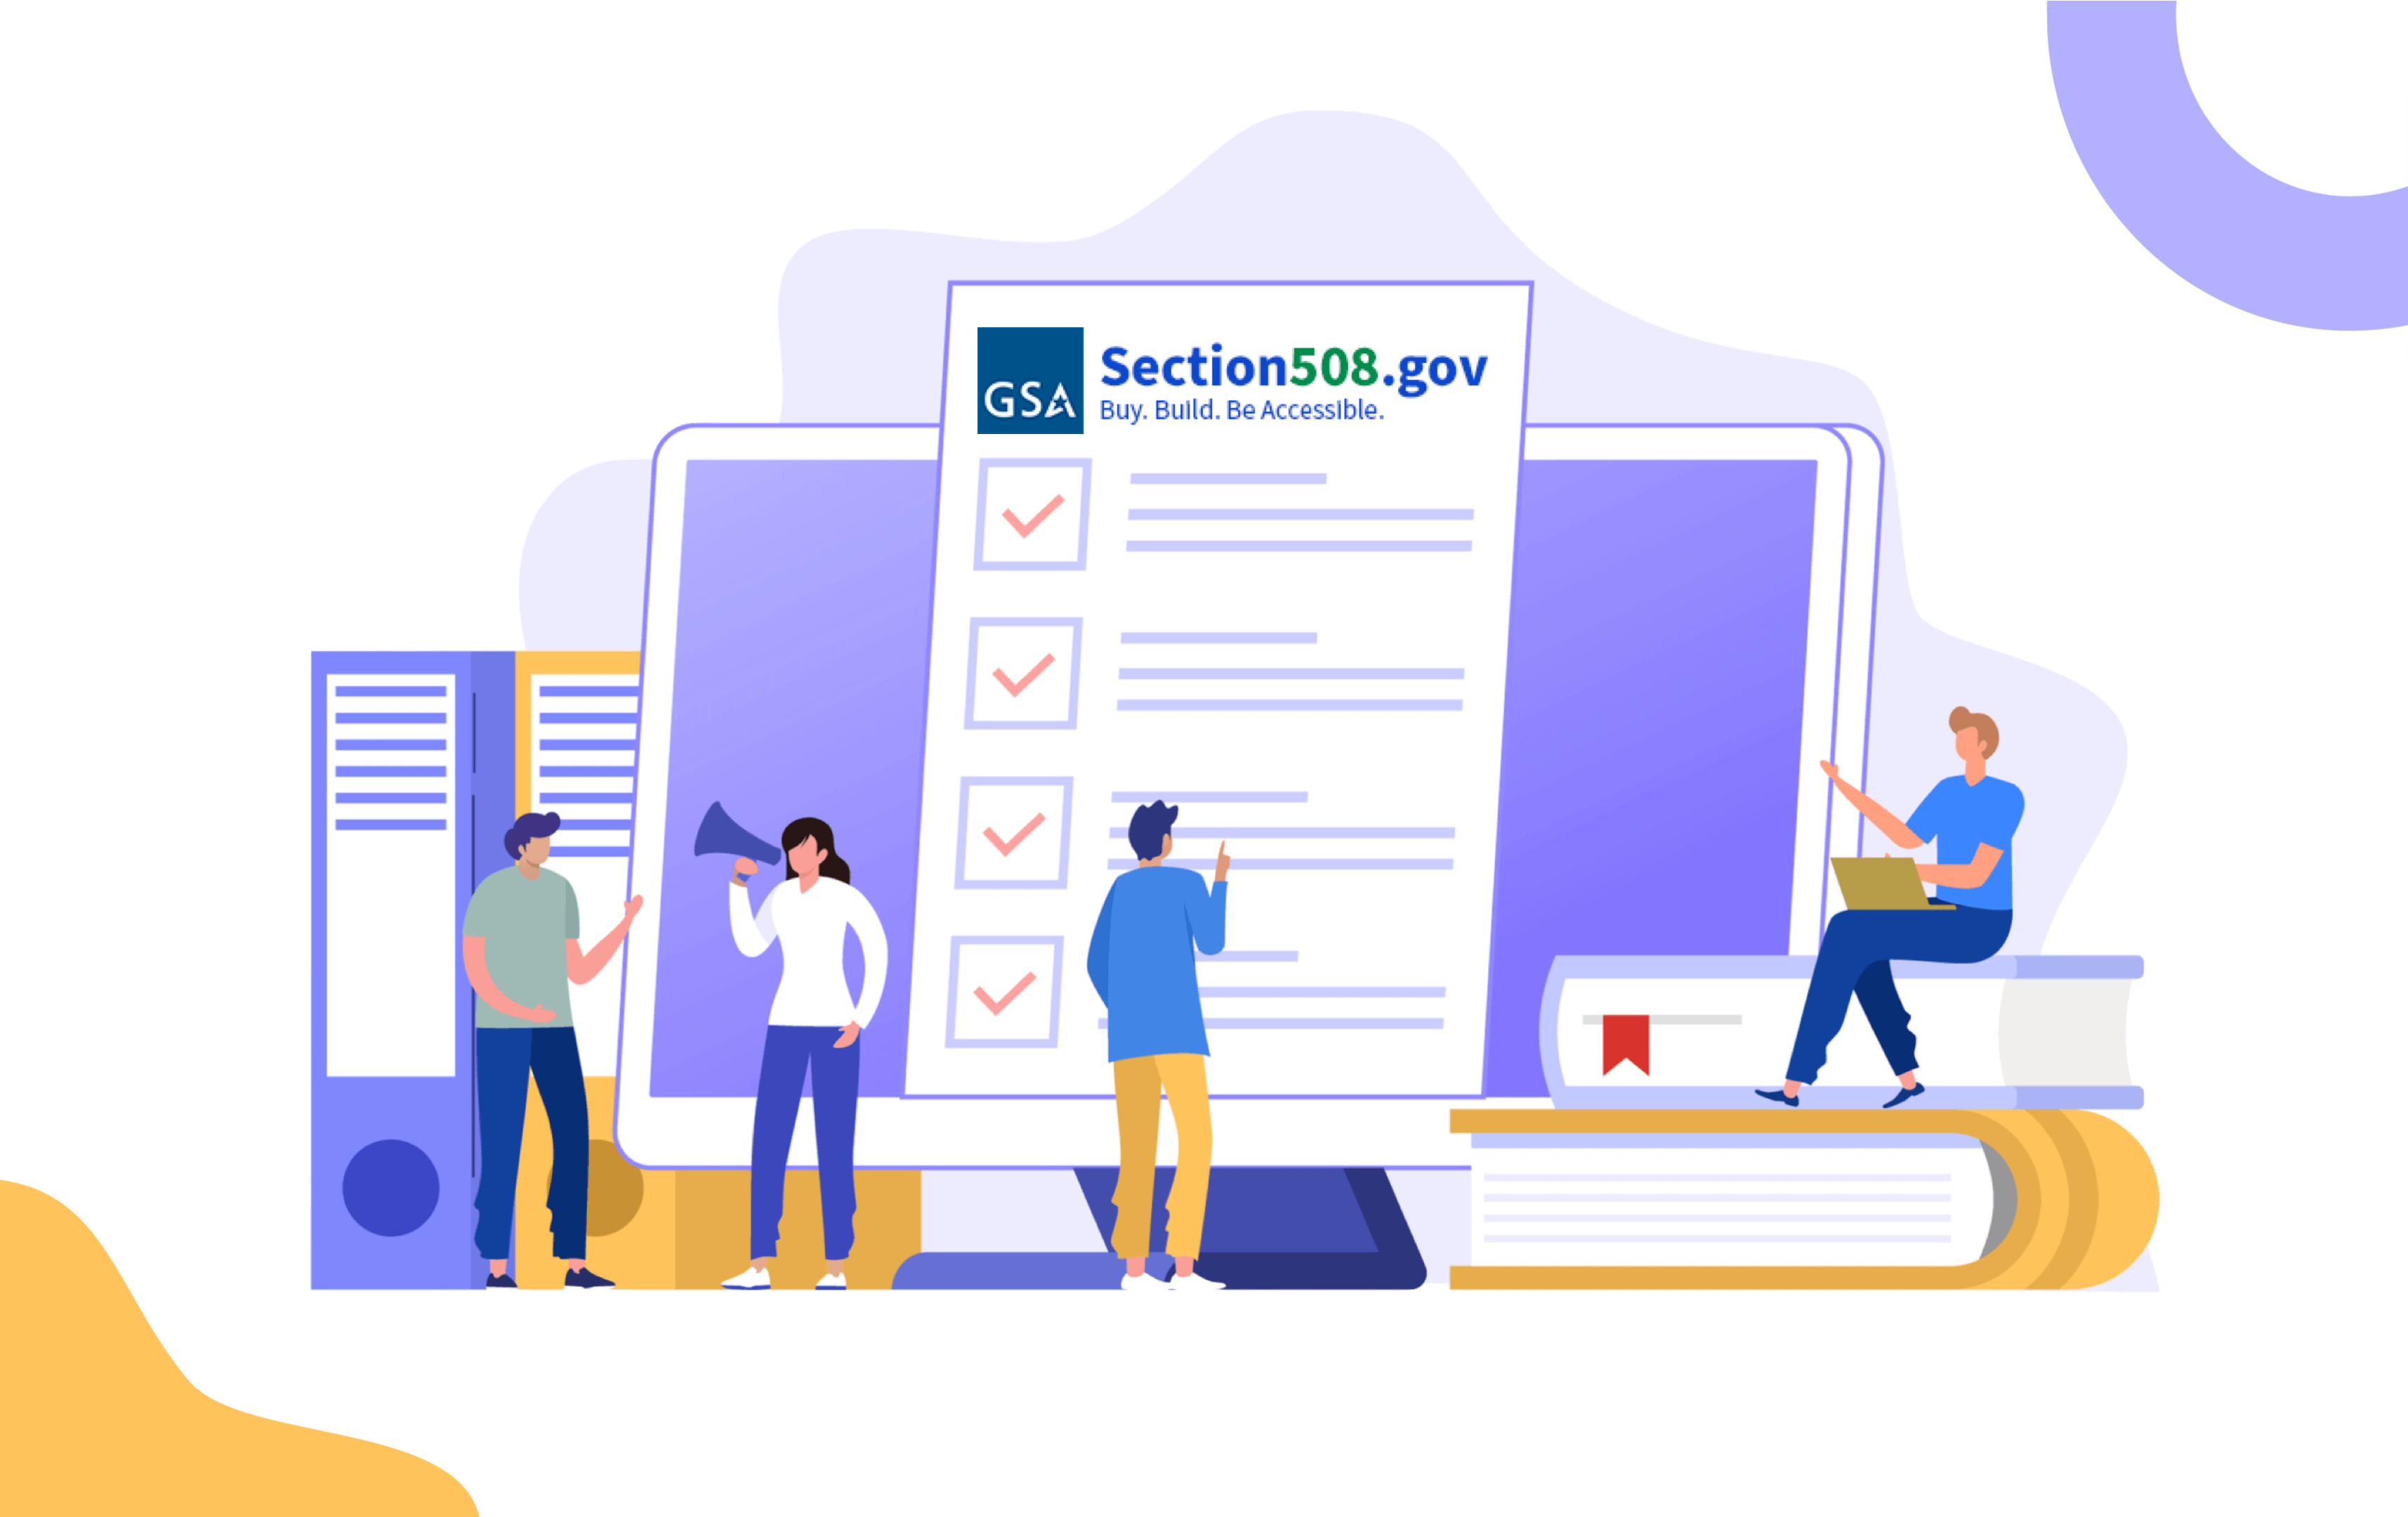 Illustration checking accessibility compliances supported by section 508 logo